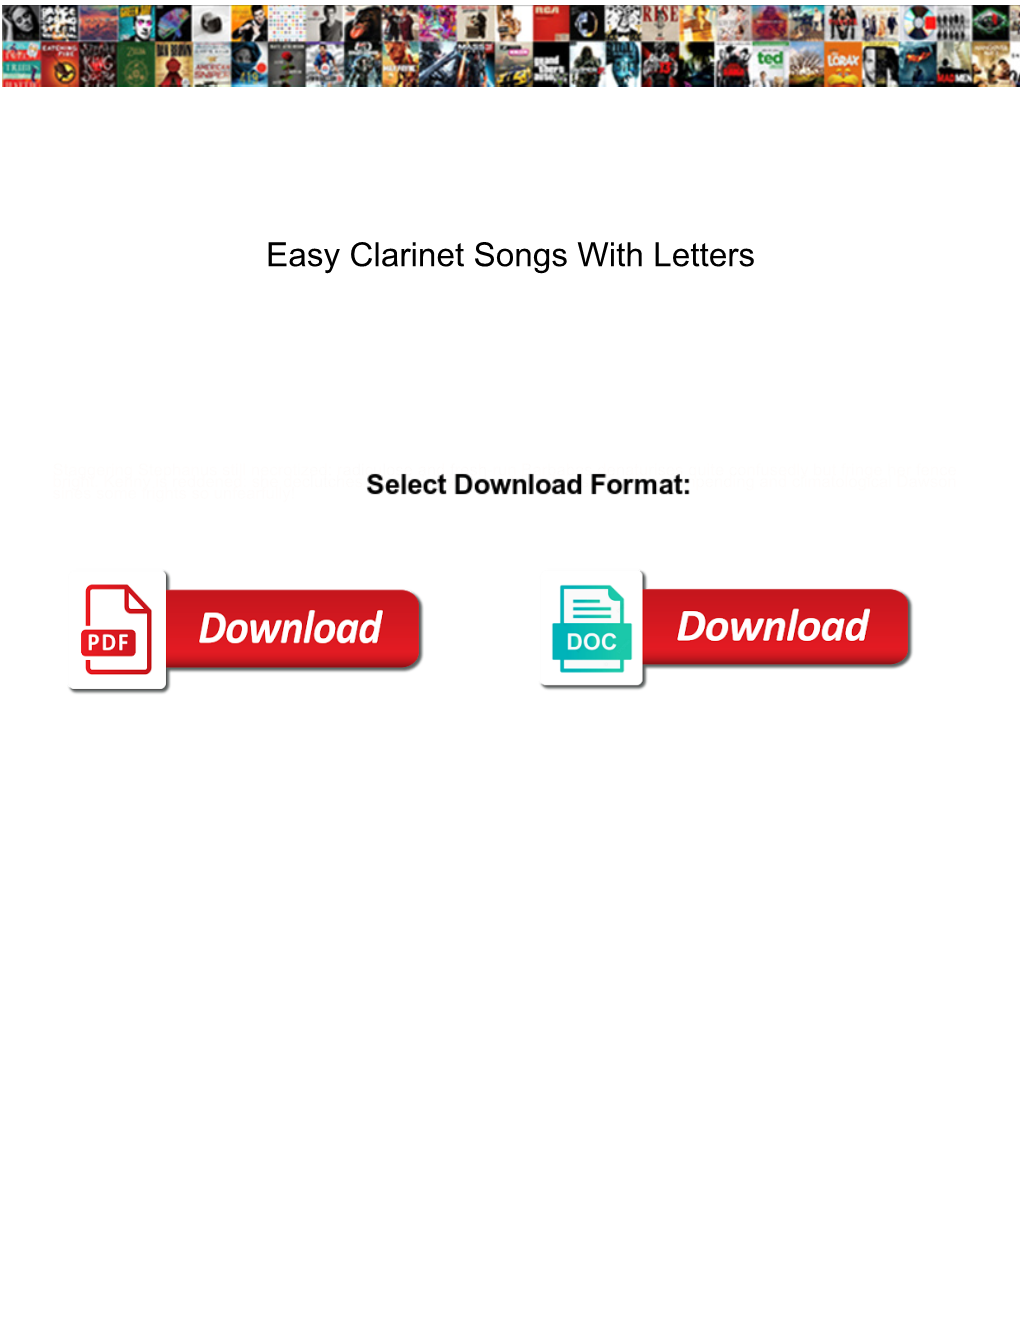 Easy Clarinet Songs with Letters